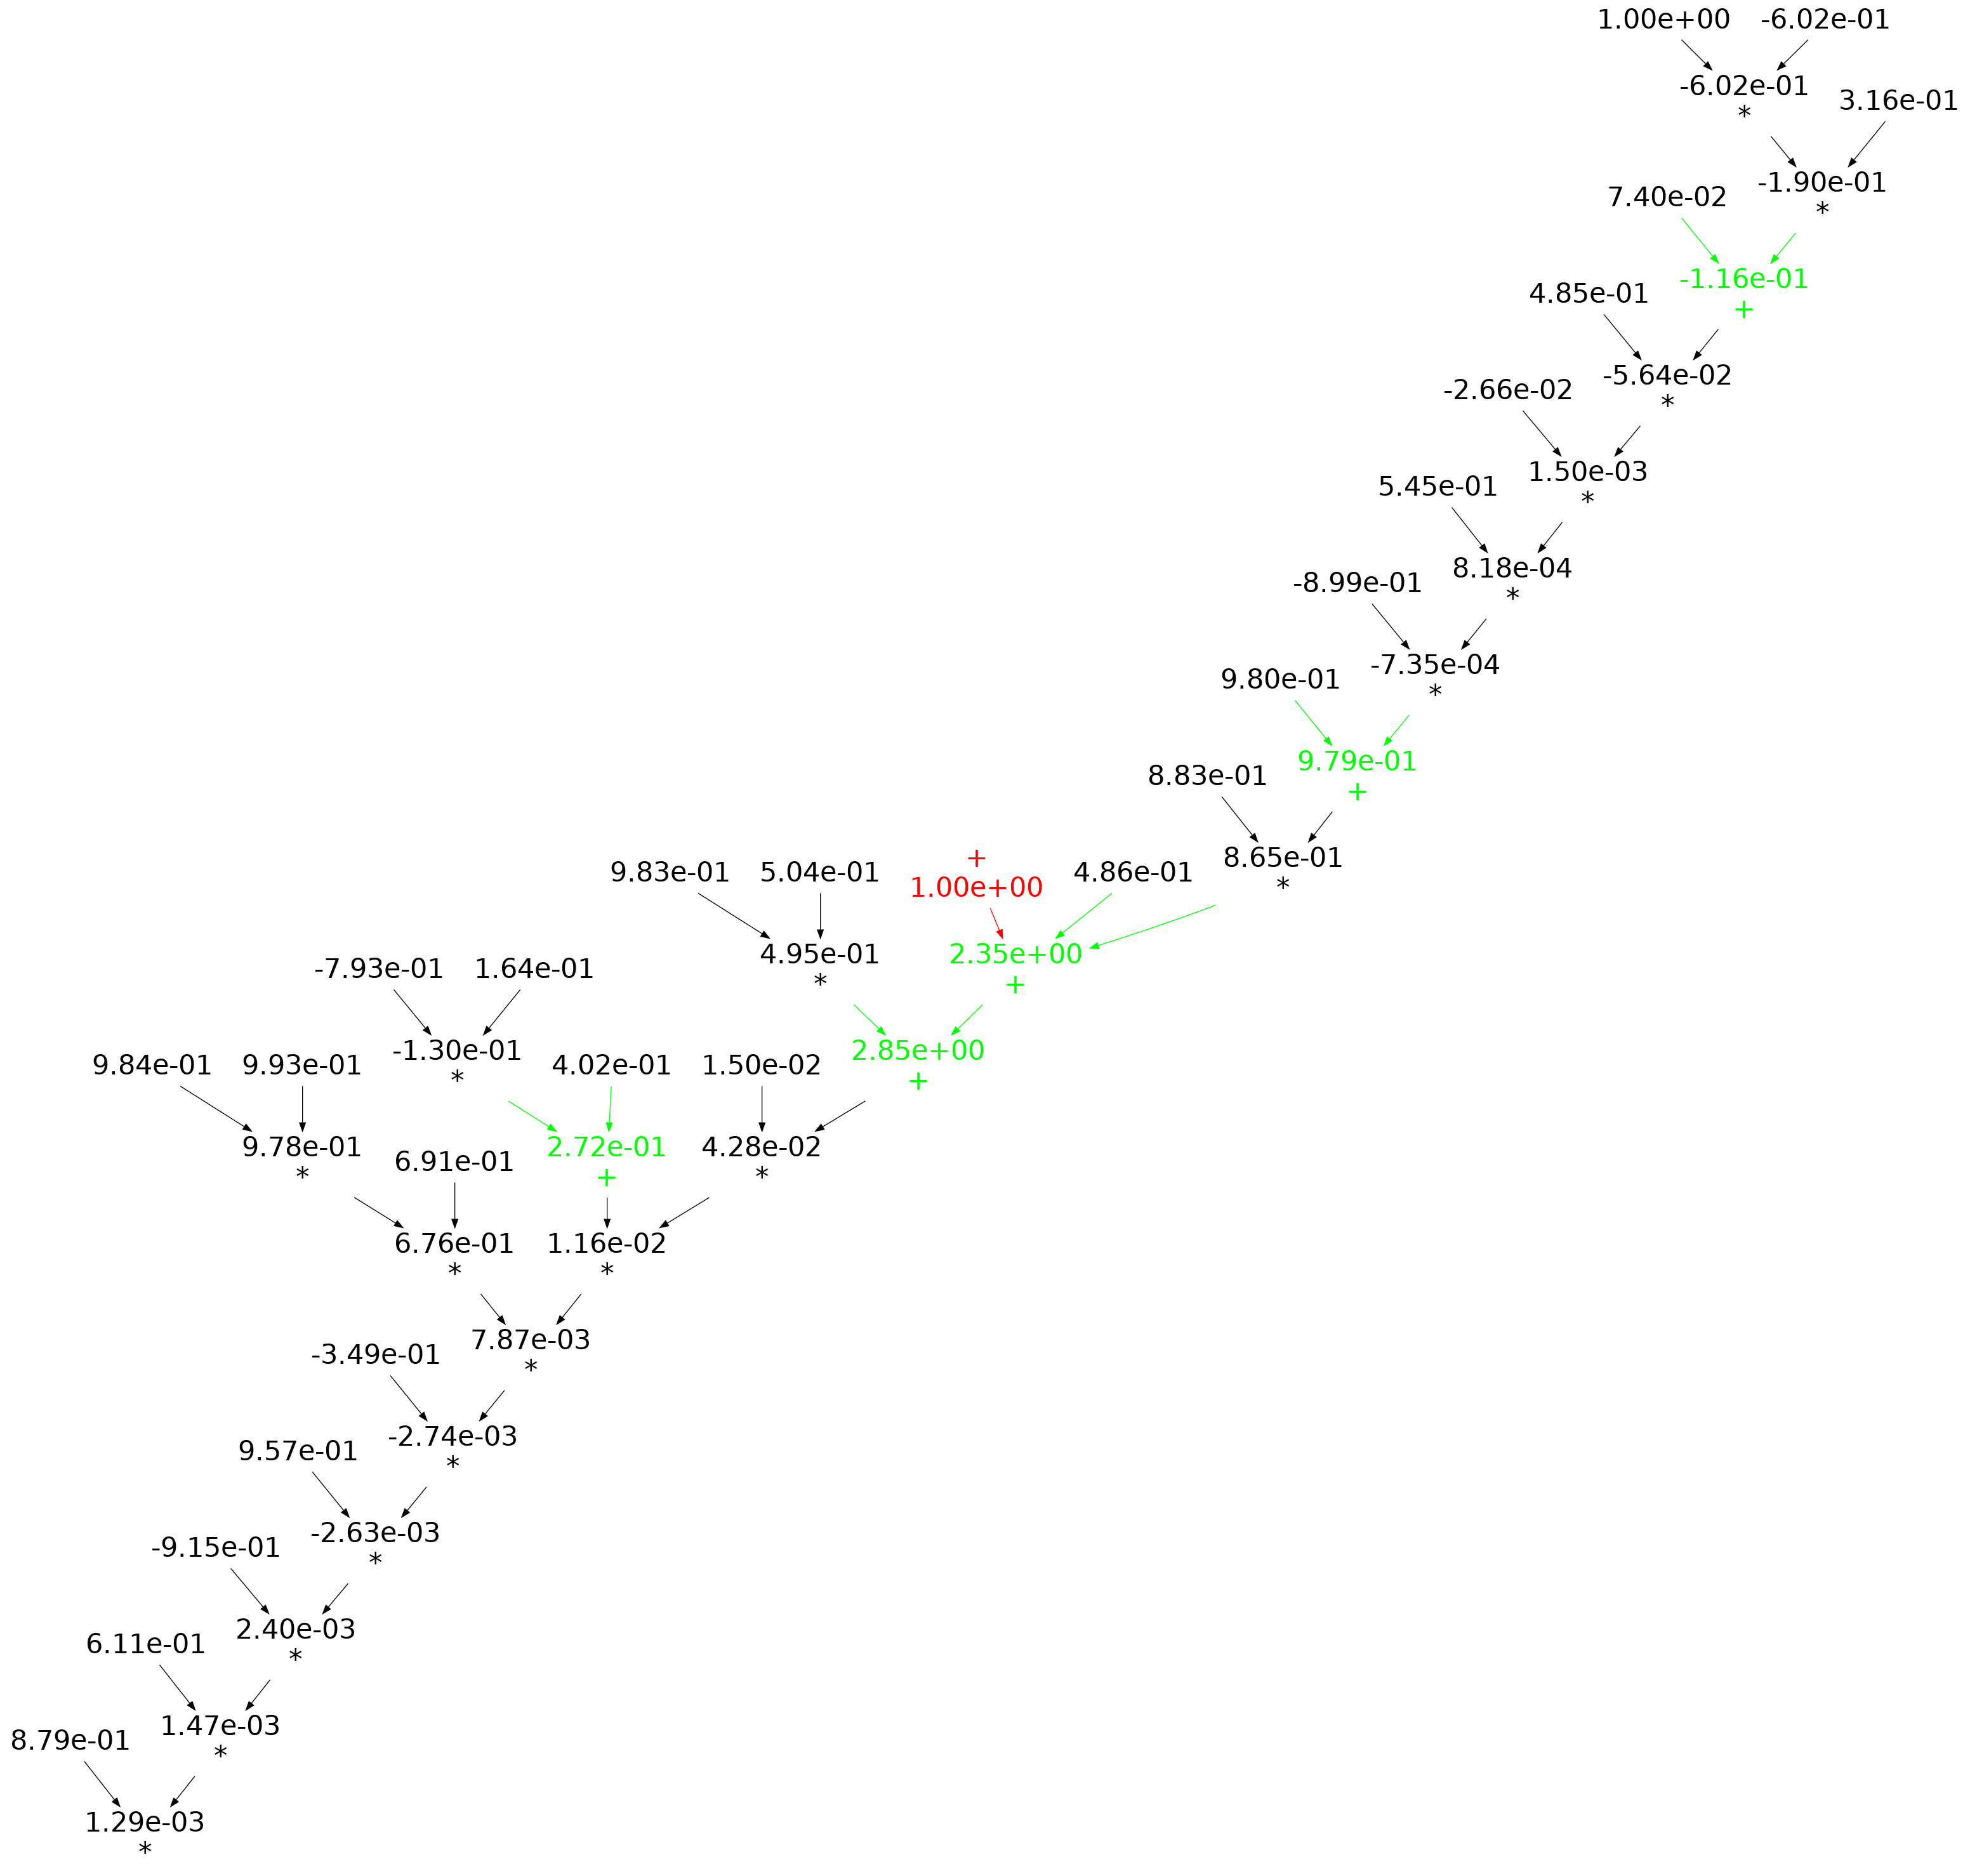 Example of a 'tall' expression tree containing 25 binary operands.